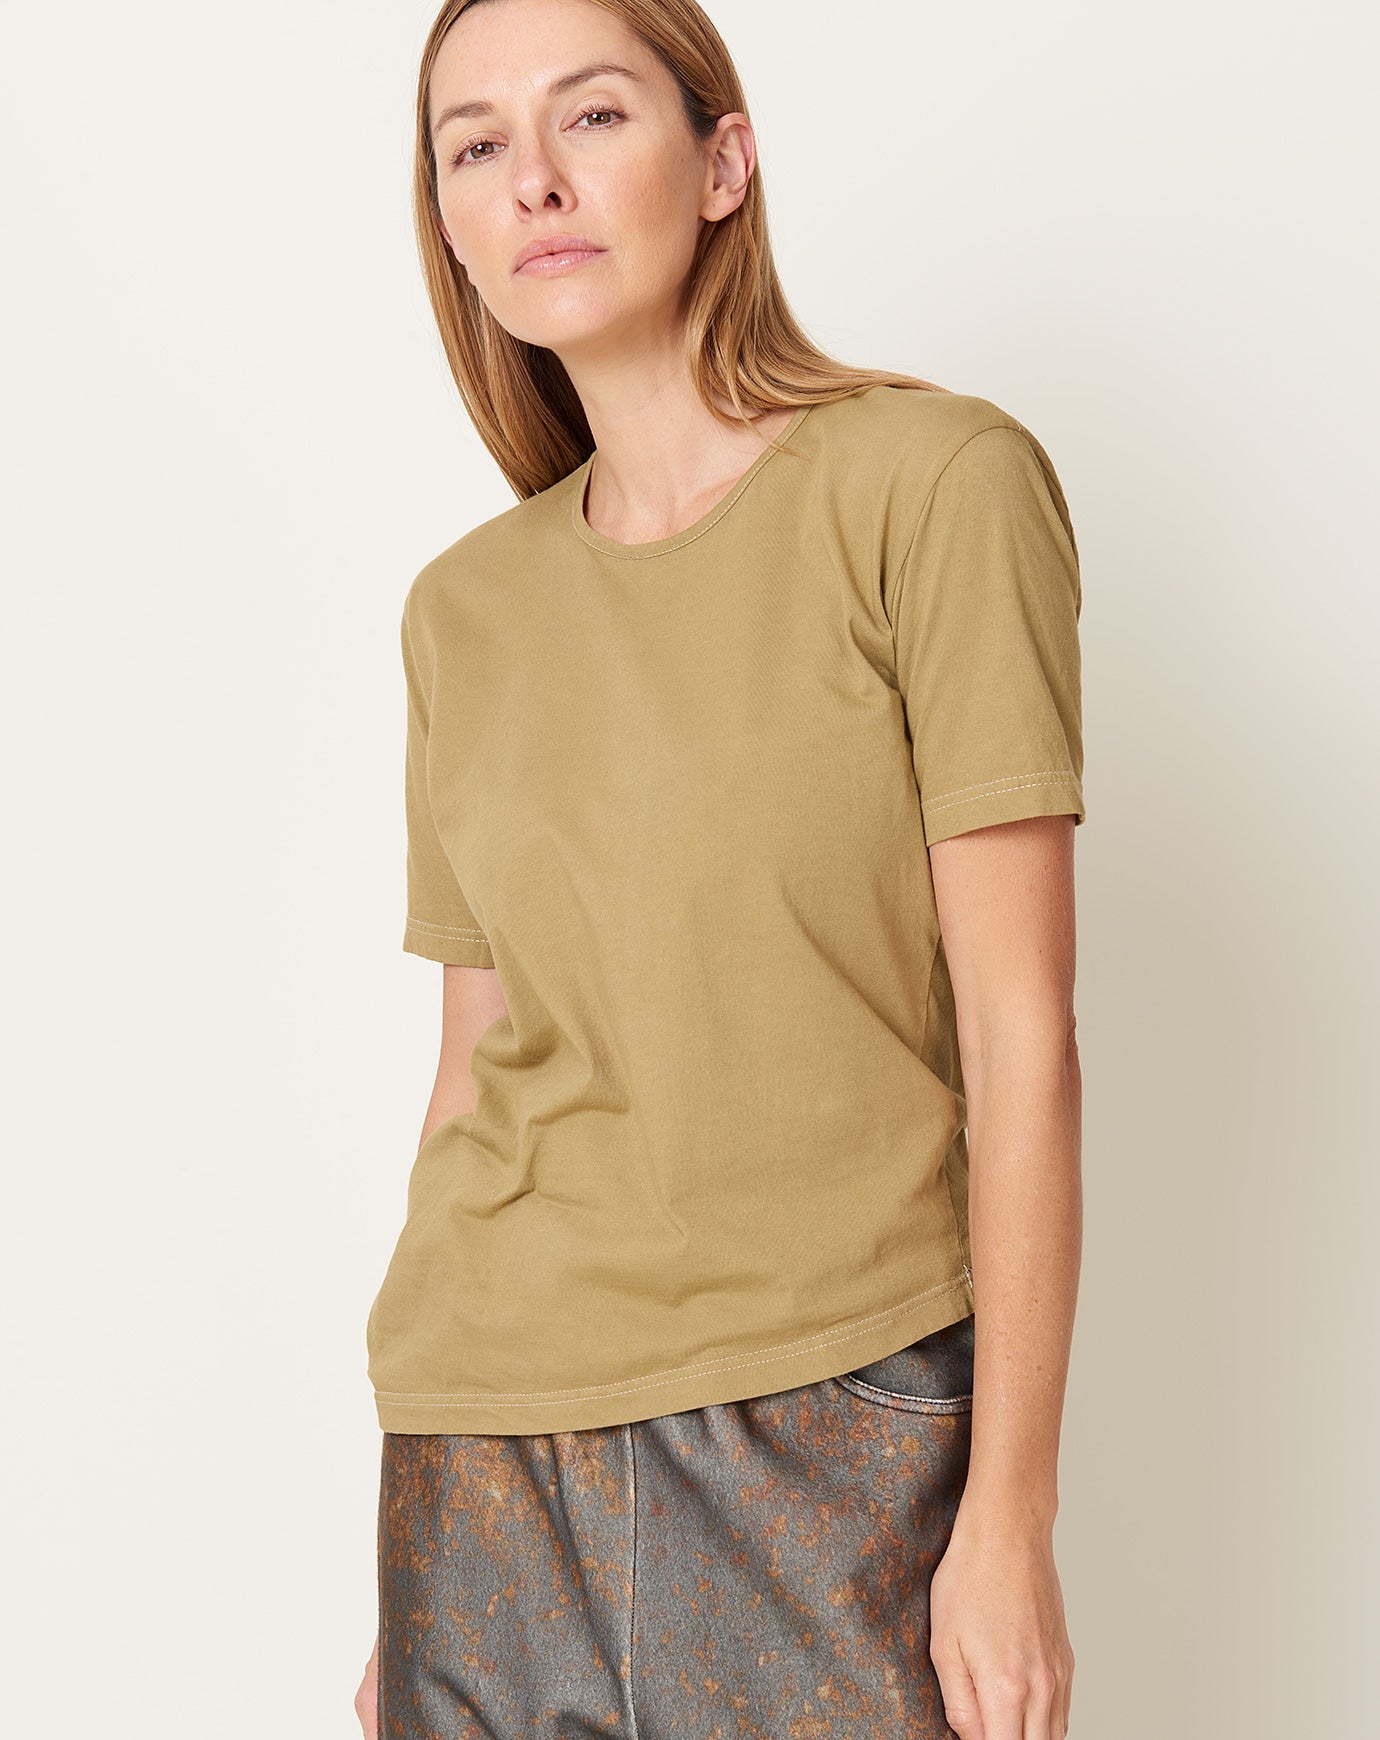 Anntian Edgy T Shirt in Garment Dyed Gold Brown